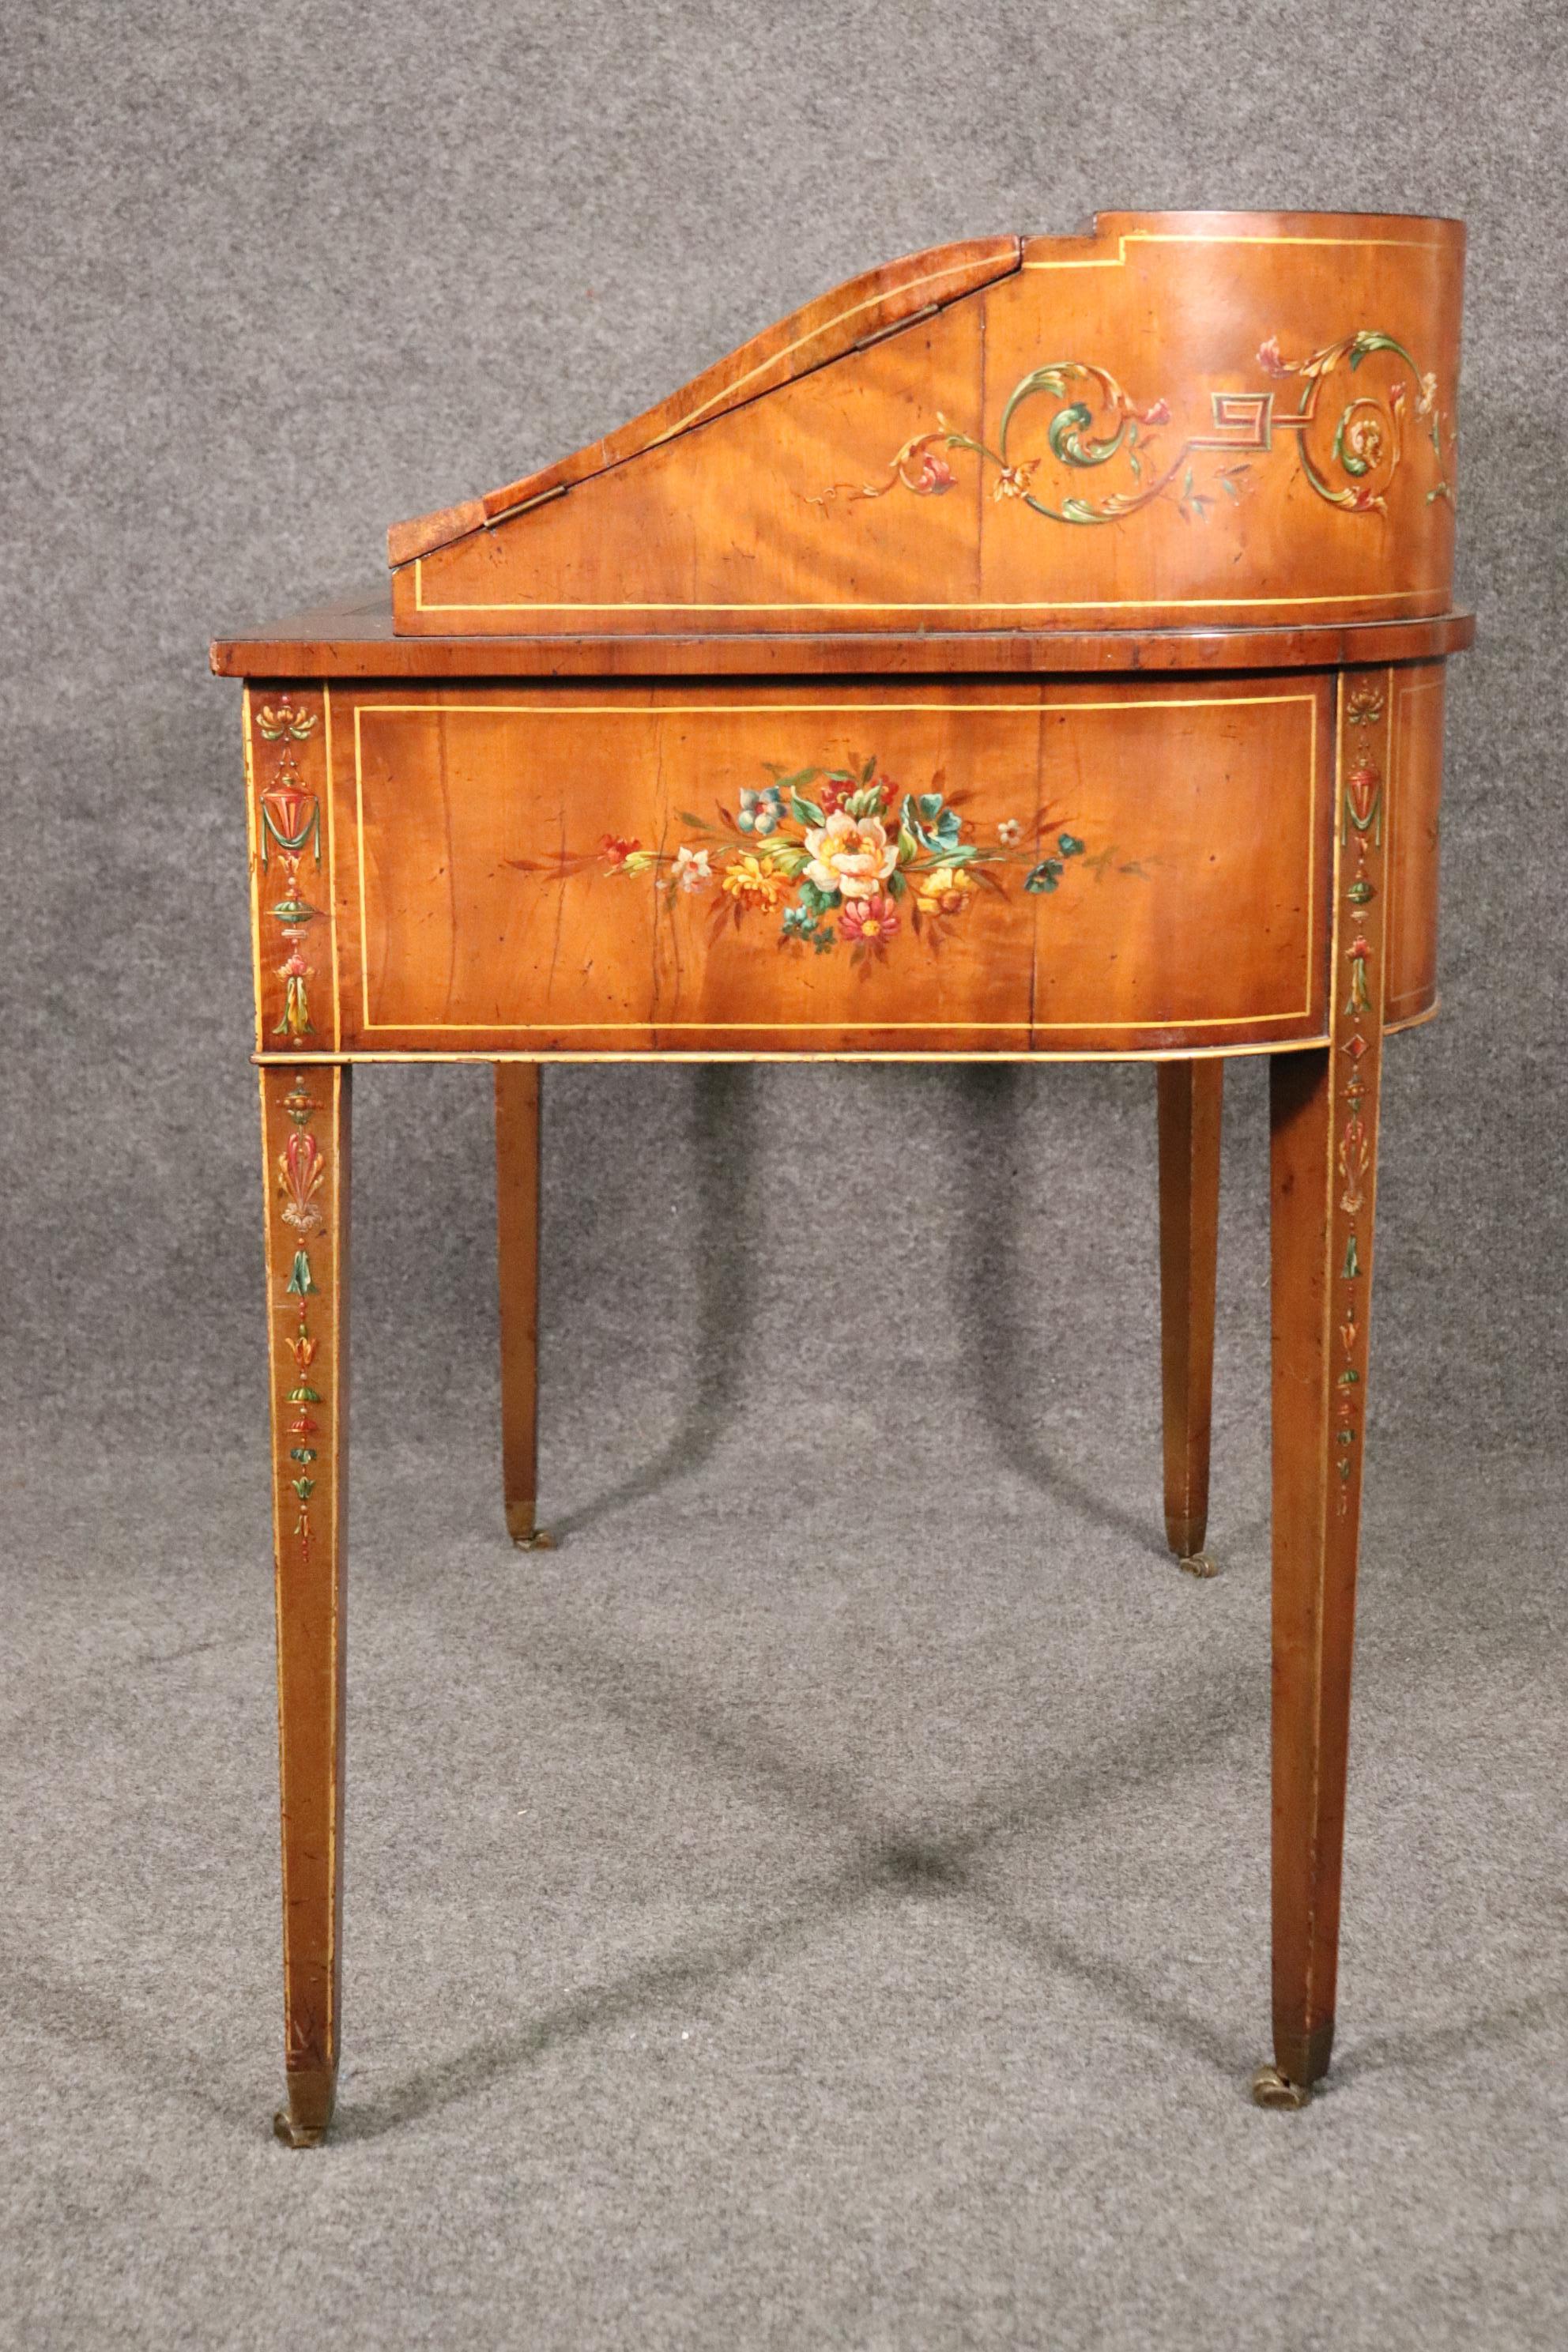 Fine Quality 1890s English Adams Paint Decorated Carlton House Desk  For Sale 1